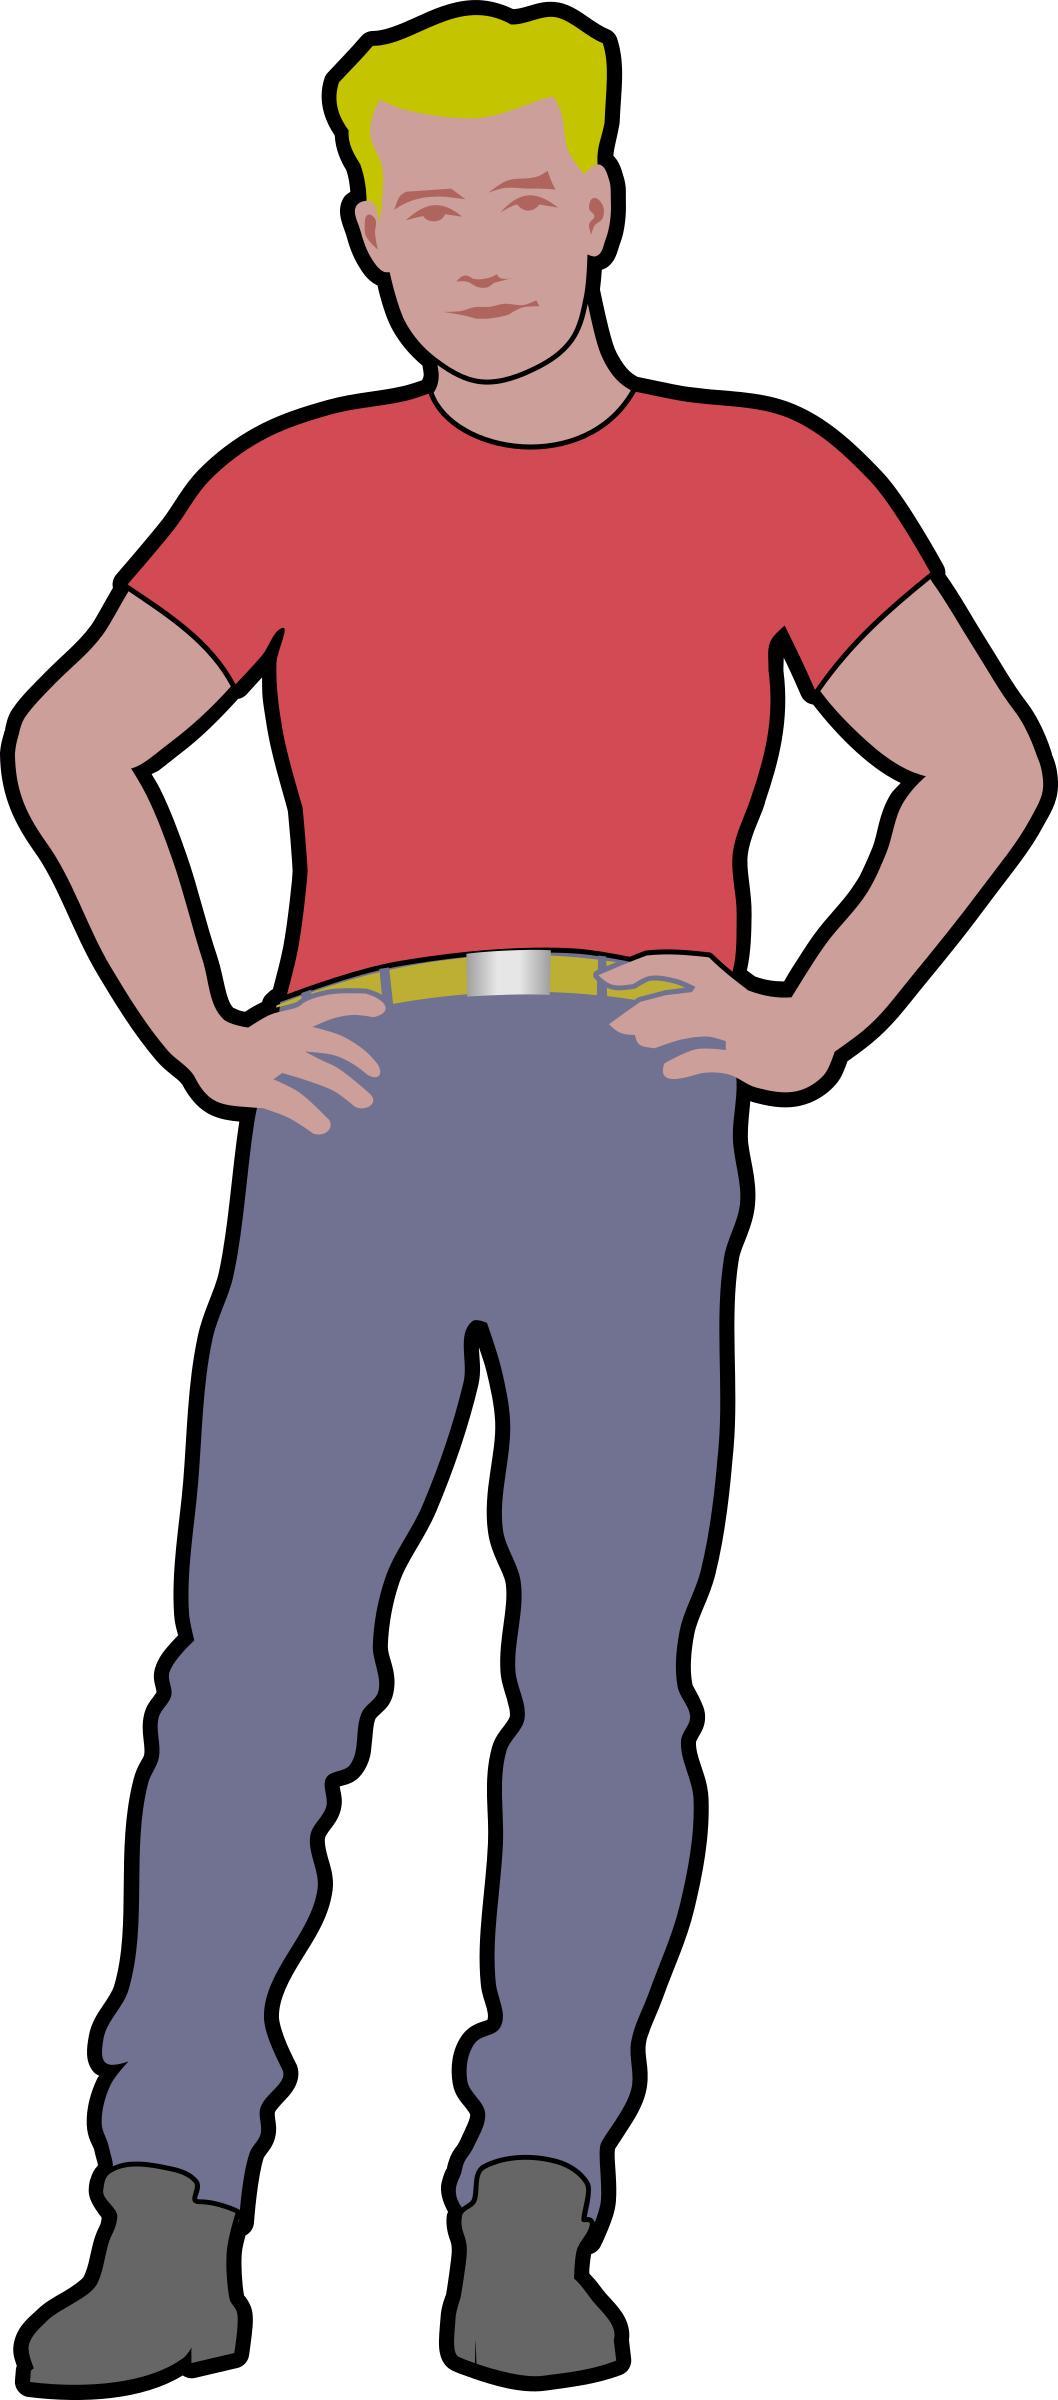 Assertive guy by Rones. Outline png transparent